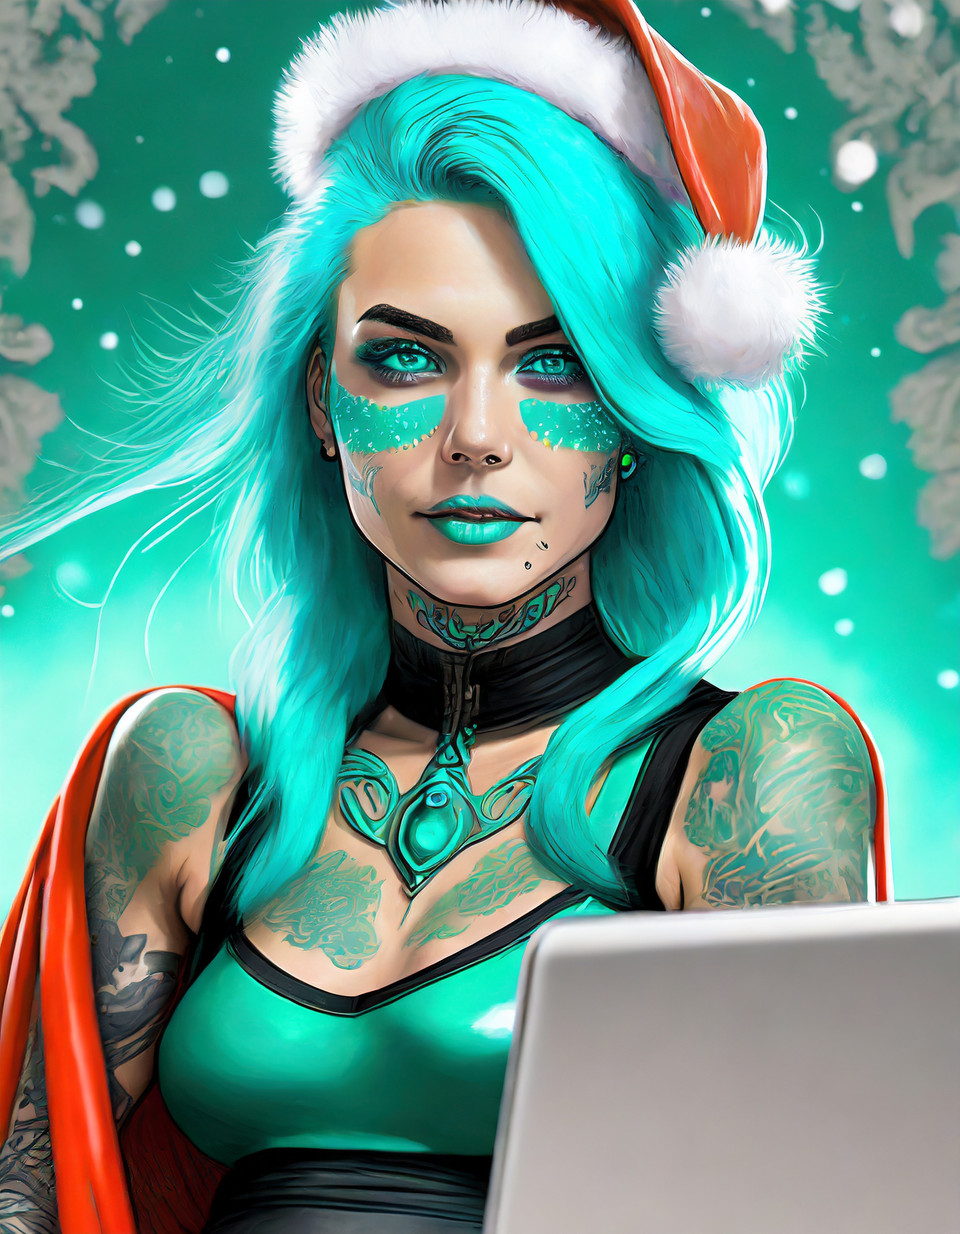 Tattooed superhero Santa Claus with turquoise cape and gloves analyzes data on a laptop